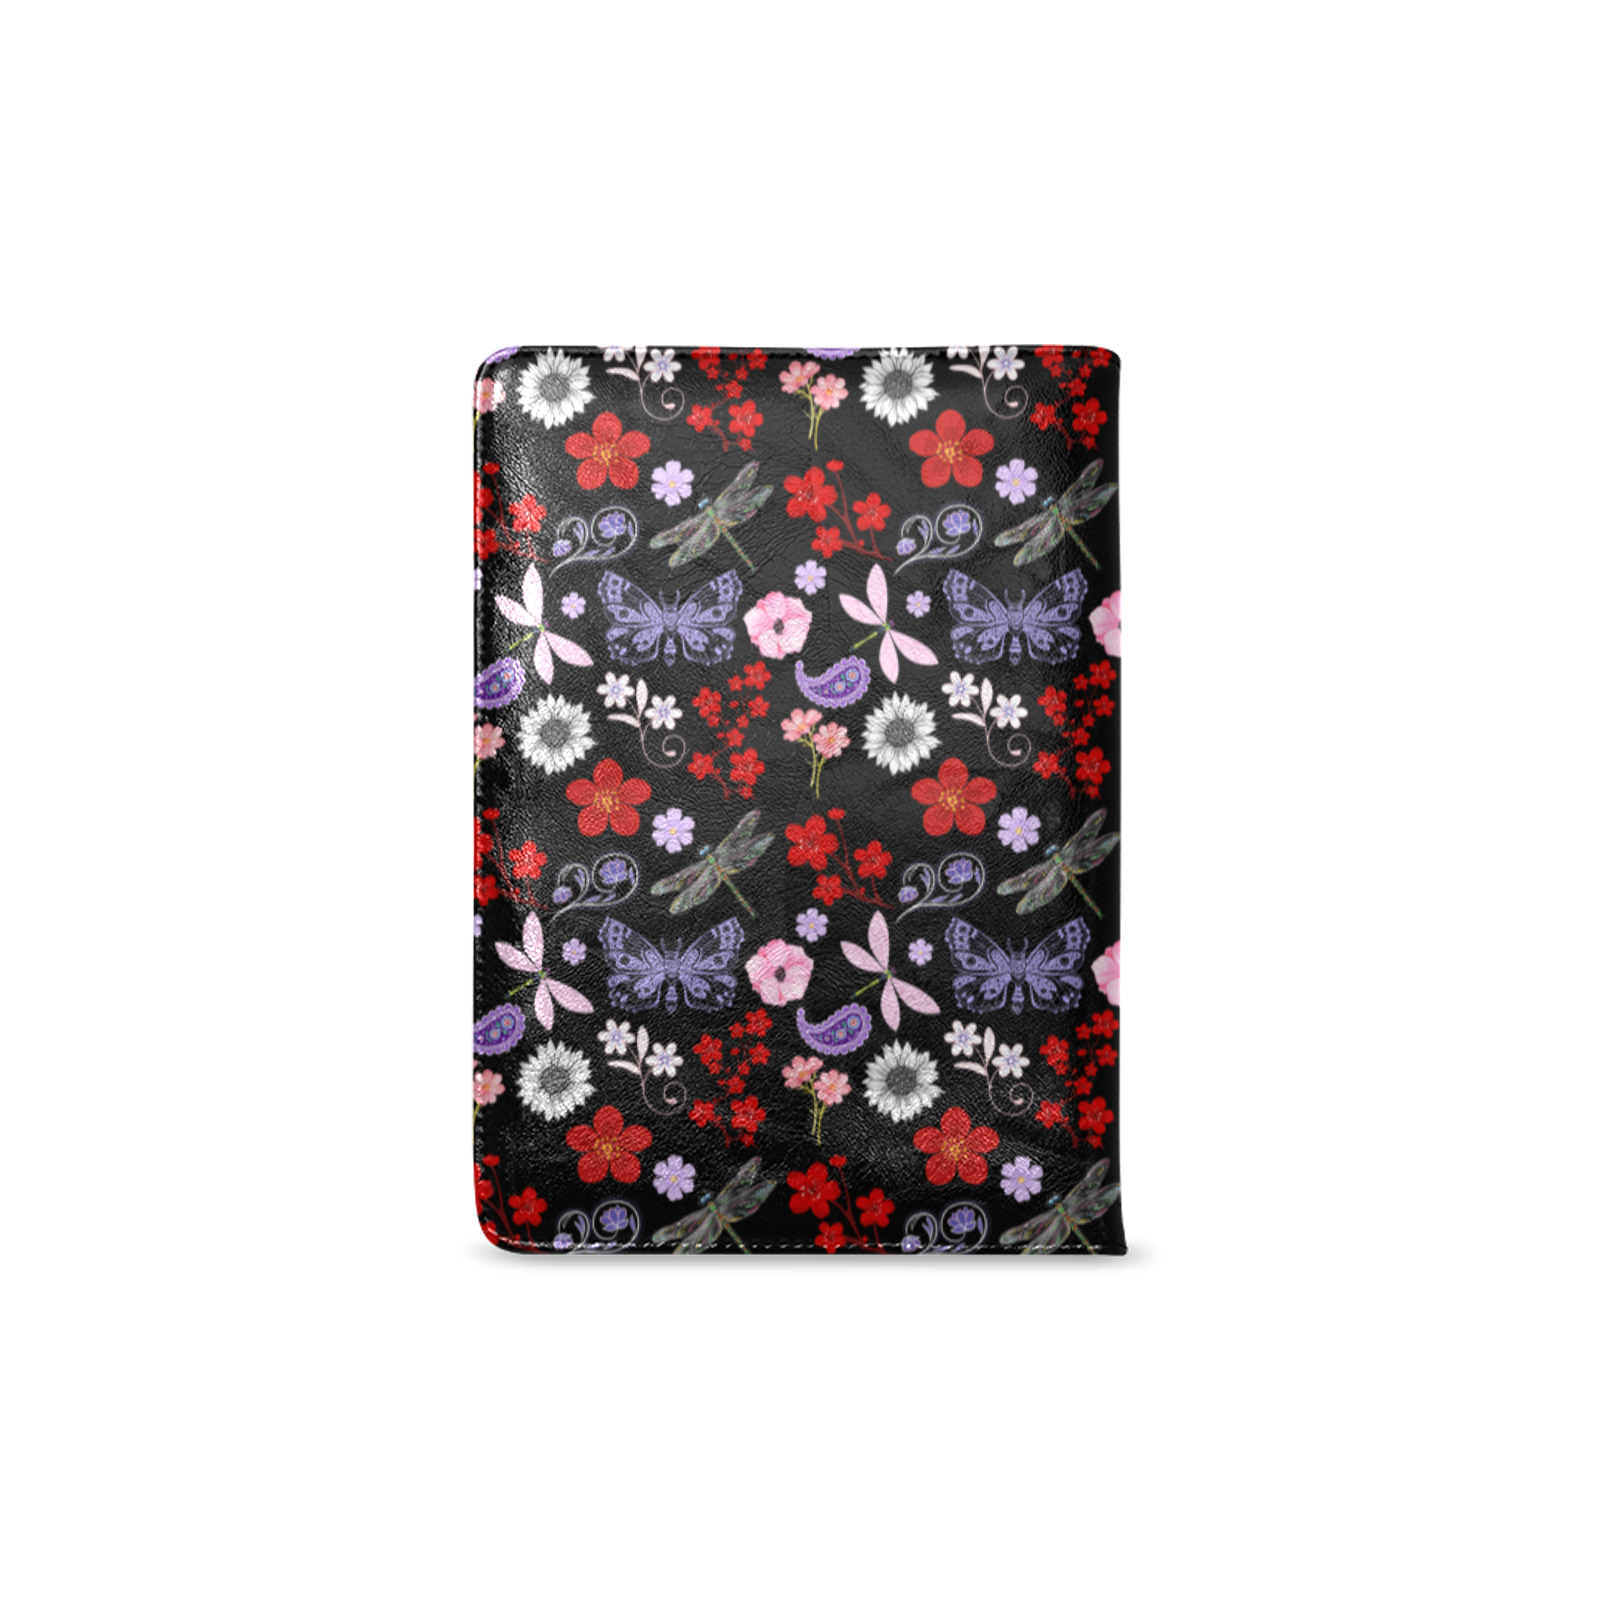 Black, Red, Pink, Purple, Dragonflies, Butterfly and Flowers Design Custom NoteBook A5